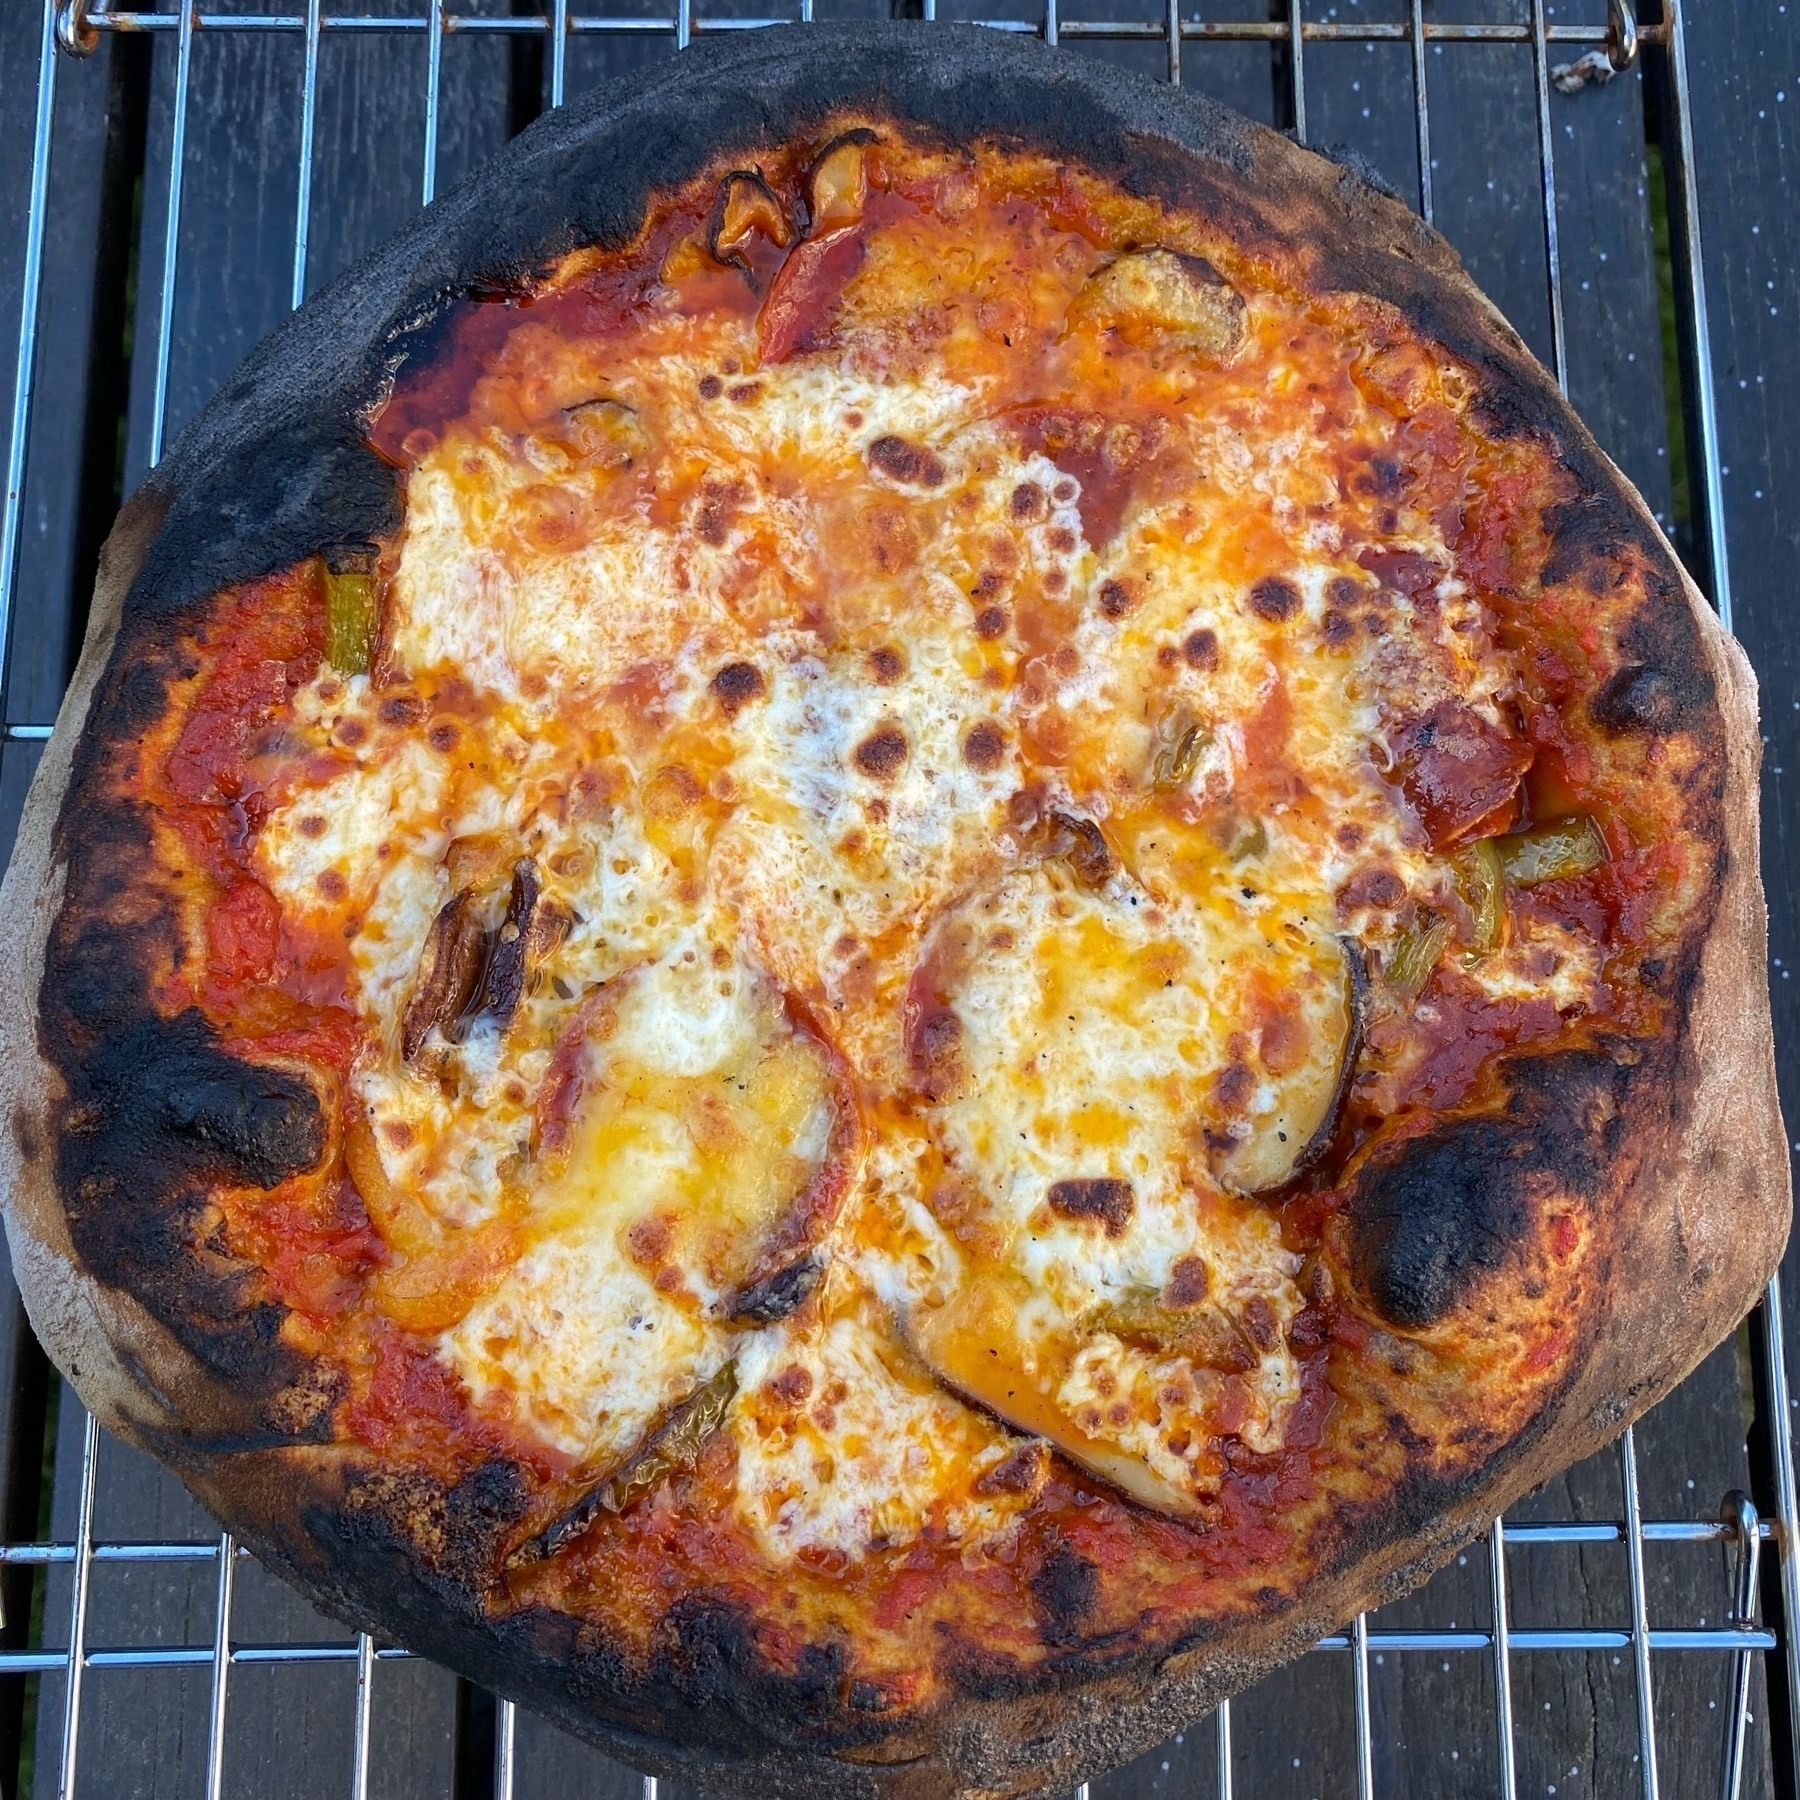 Small pizza on a cooling rack.